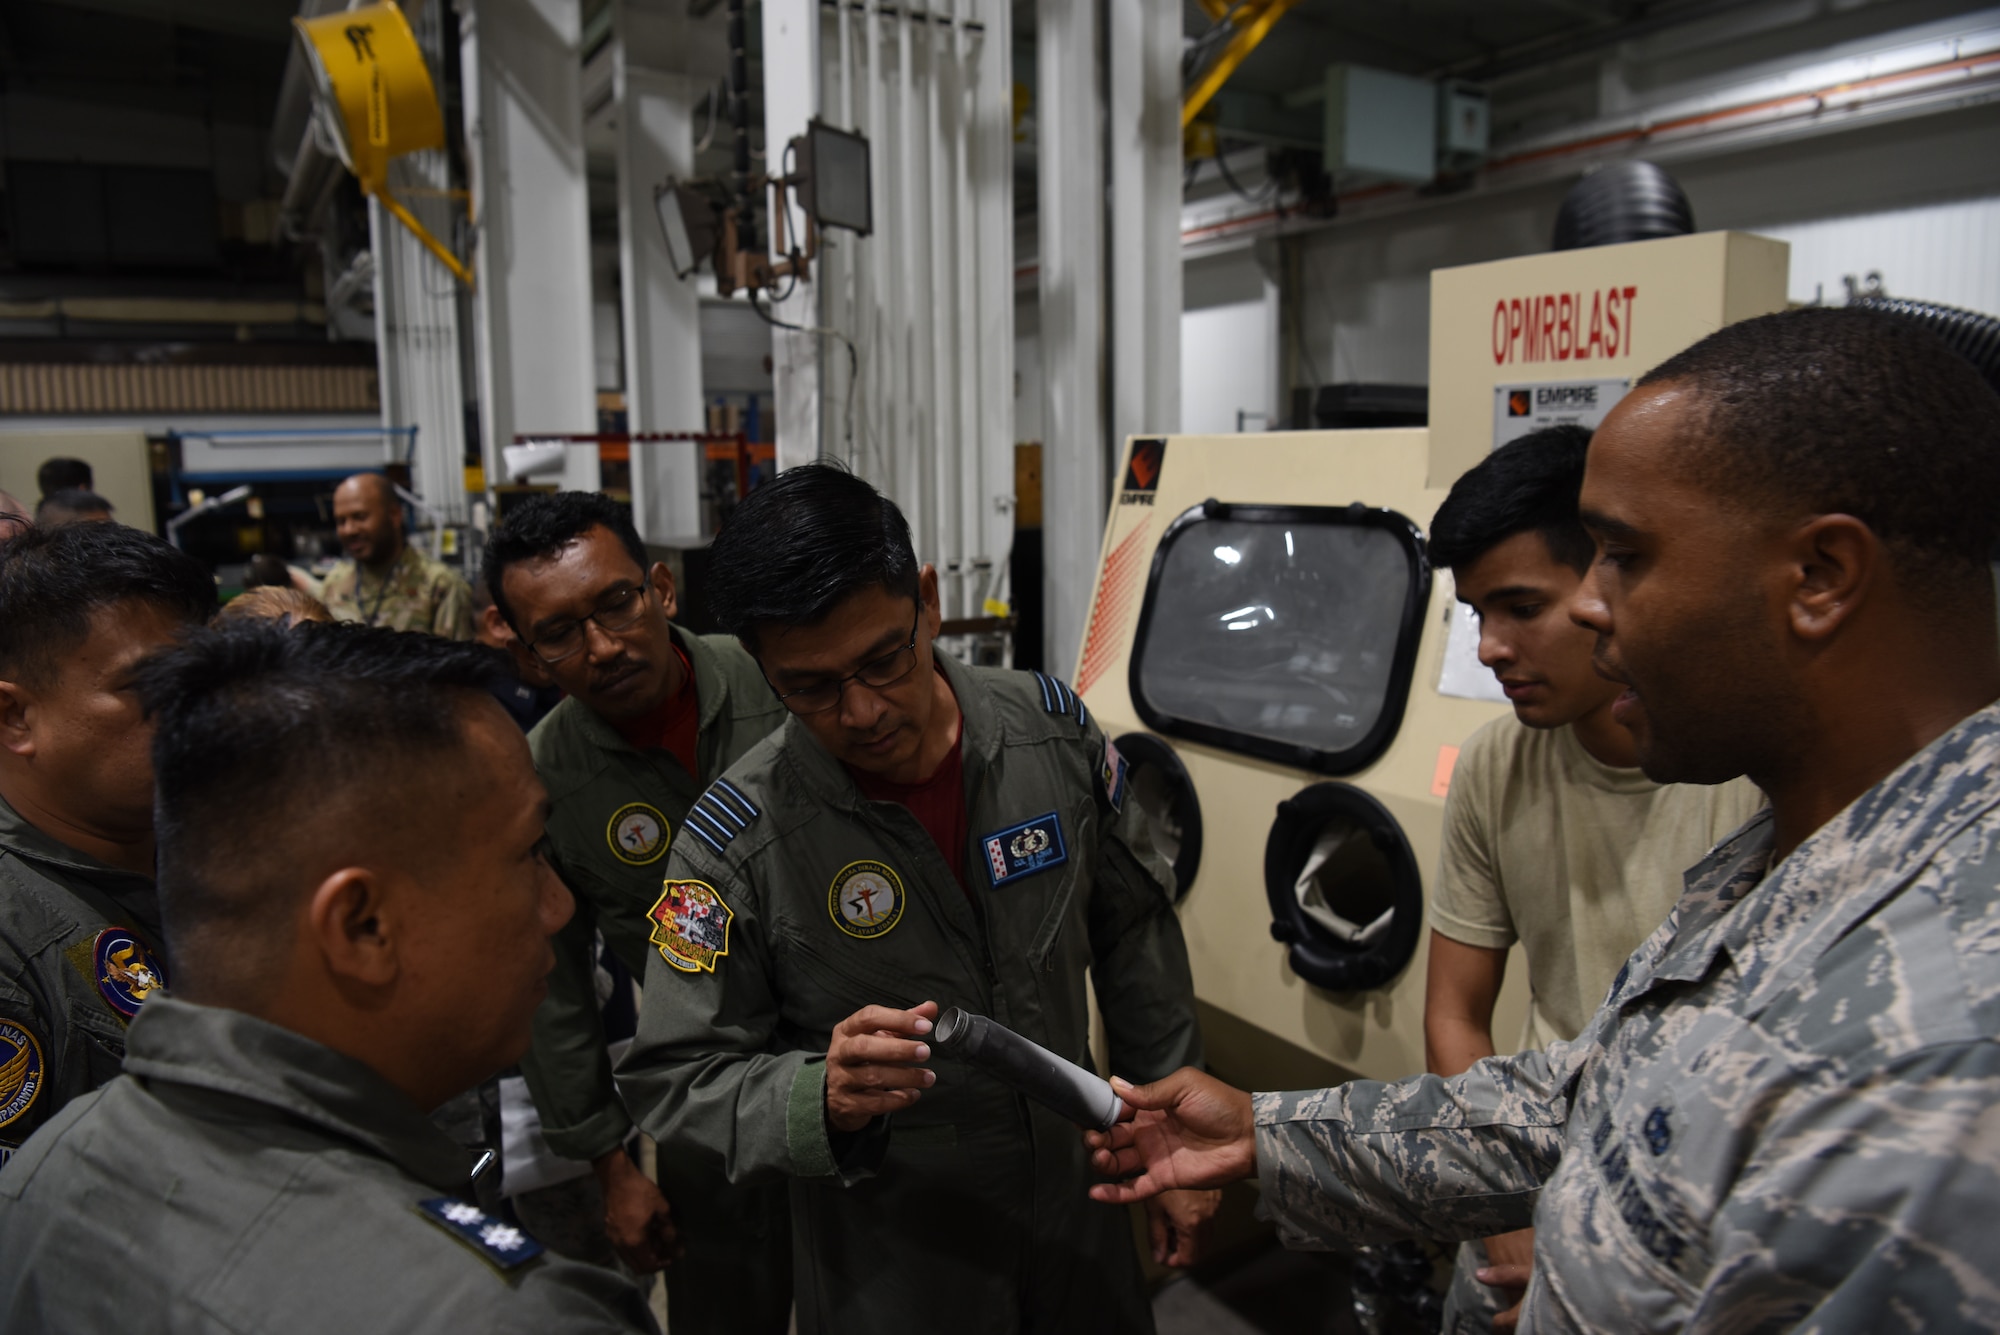 Royal Malaysian air force Col Ir. Azhar bin Idris inspects a 30mm shell after a restoration demonstration during the 2019 Logistics and Safety Symposium held at Osan Air Base, Republic of Korea, Sept. 5, 2019.